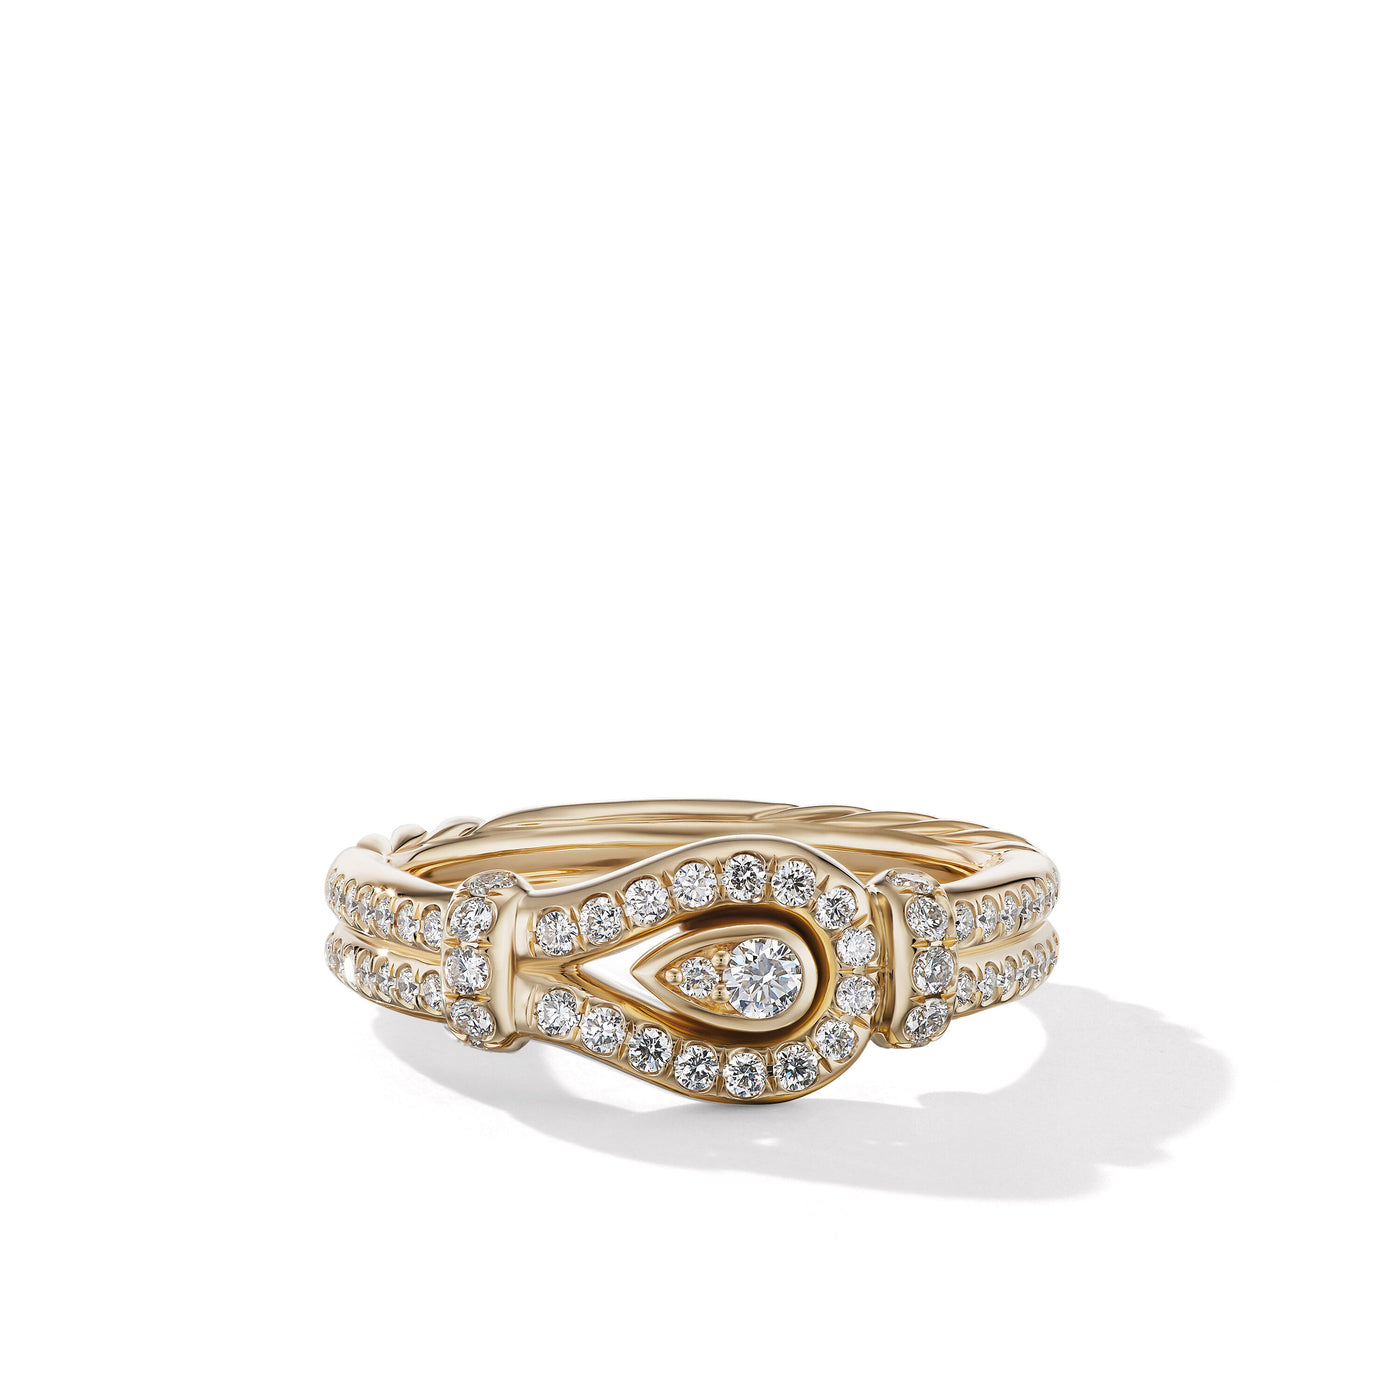 Thoroughbred Loop Ring in 18K Yellow Gold with Diamonds\, 4mm